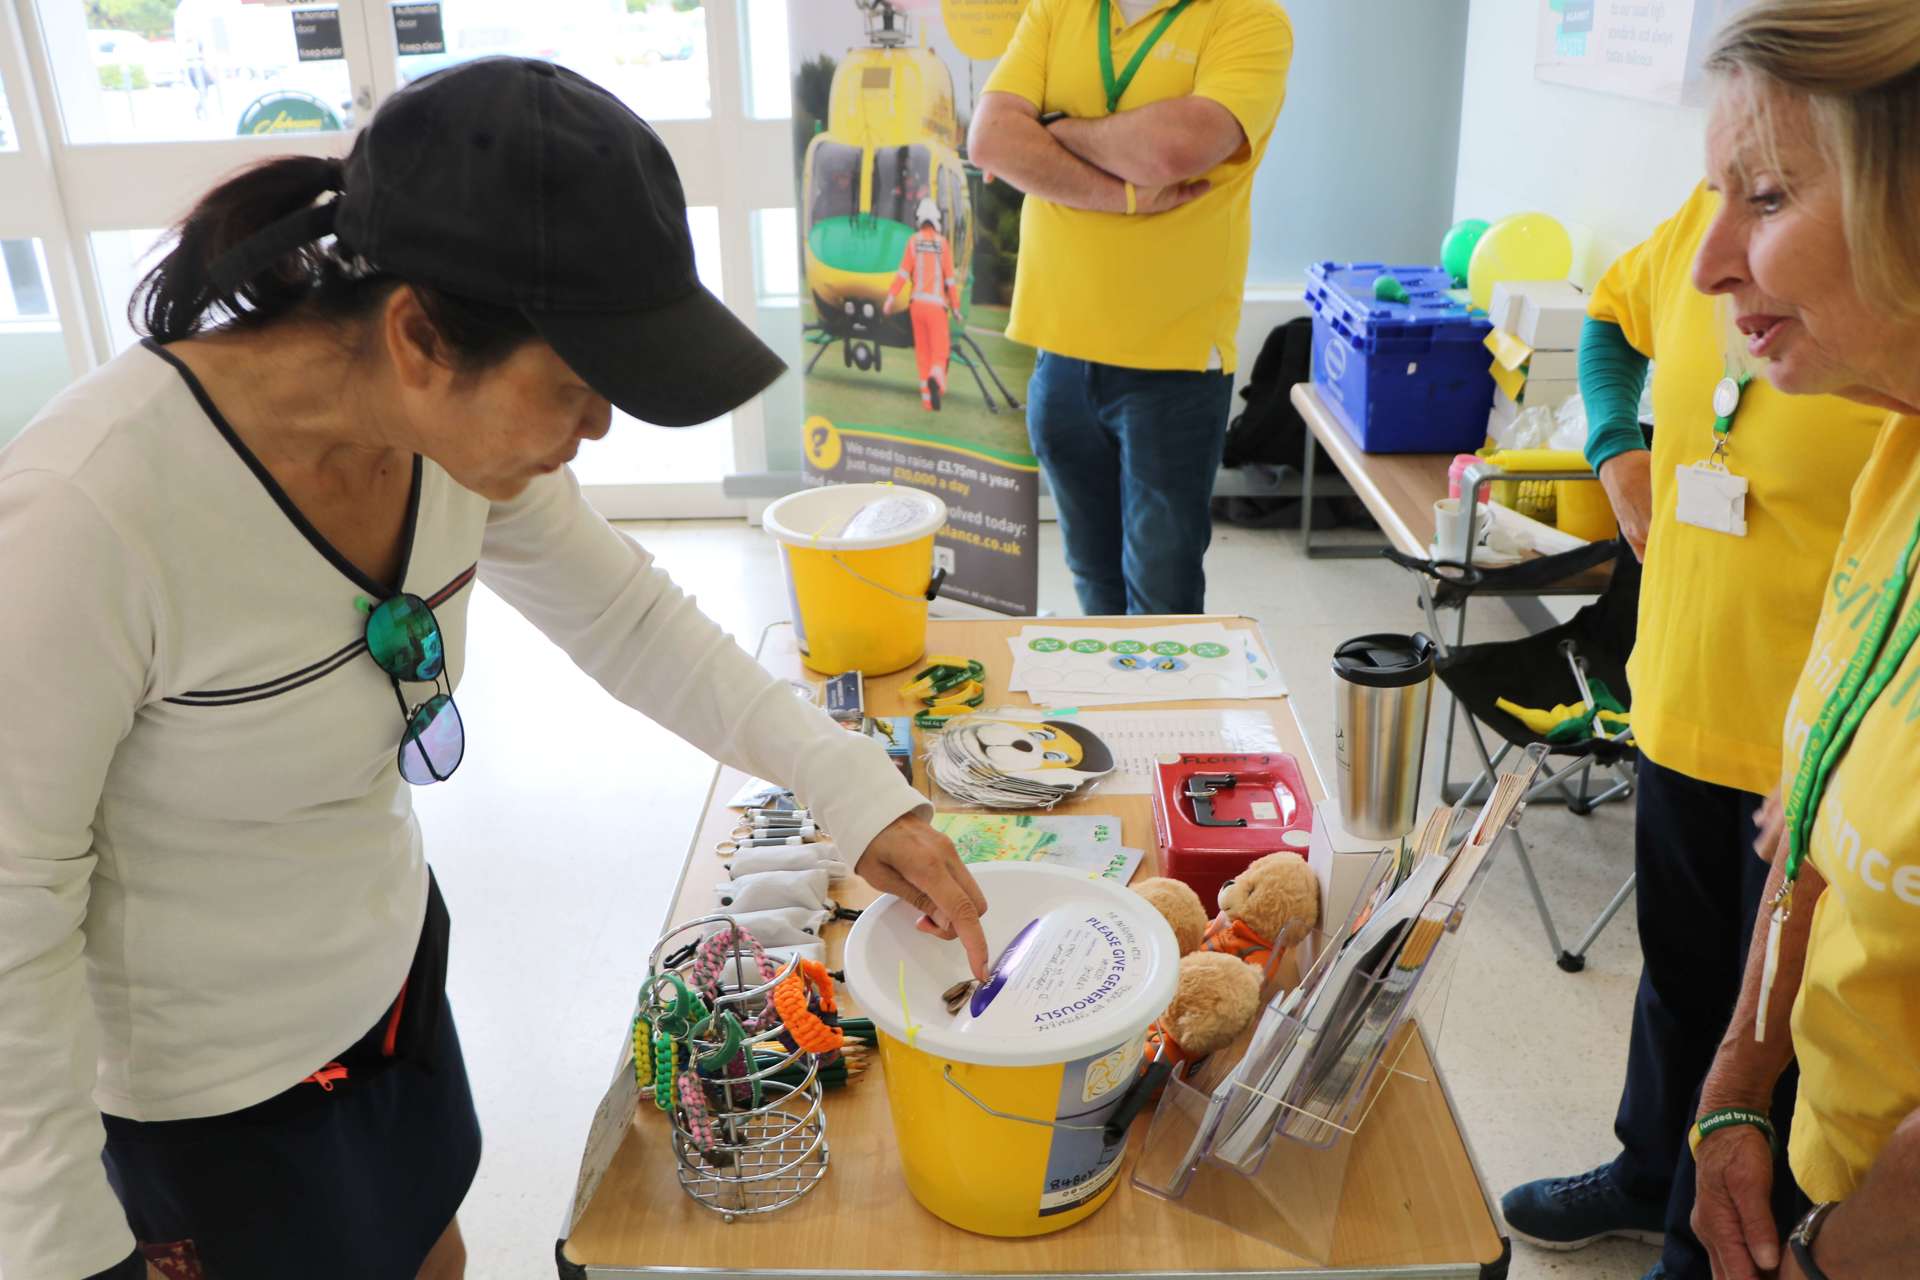 A supporter putting coins into a yellow collection bucket at a supermarket collection. There are three volunteers and table full of merchandise behind them.